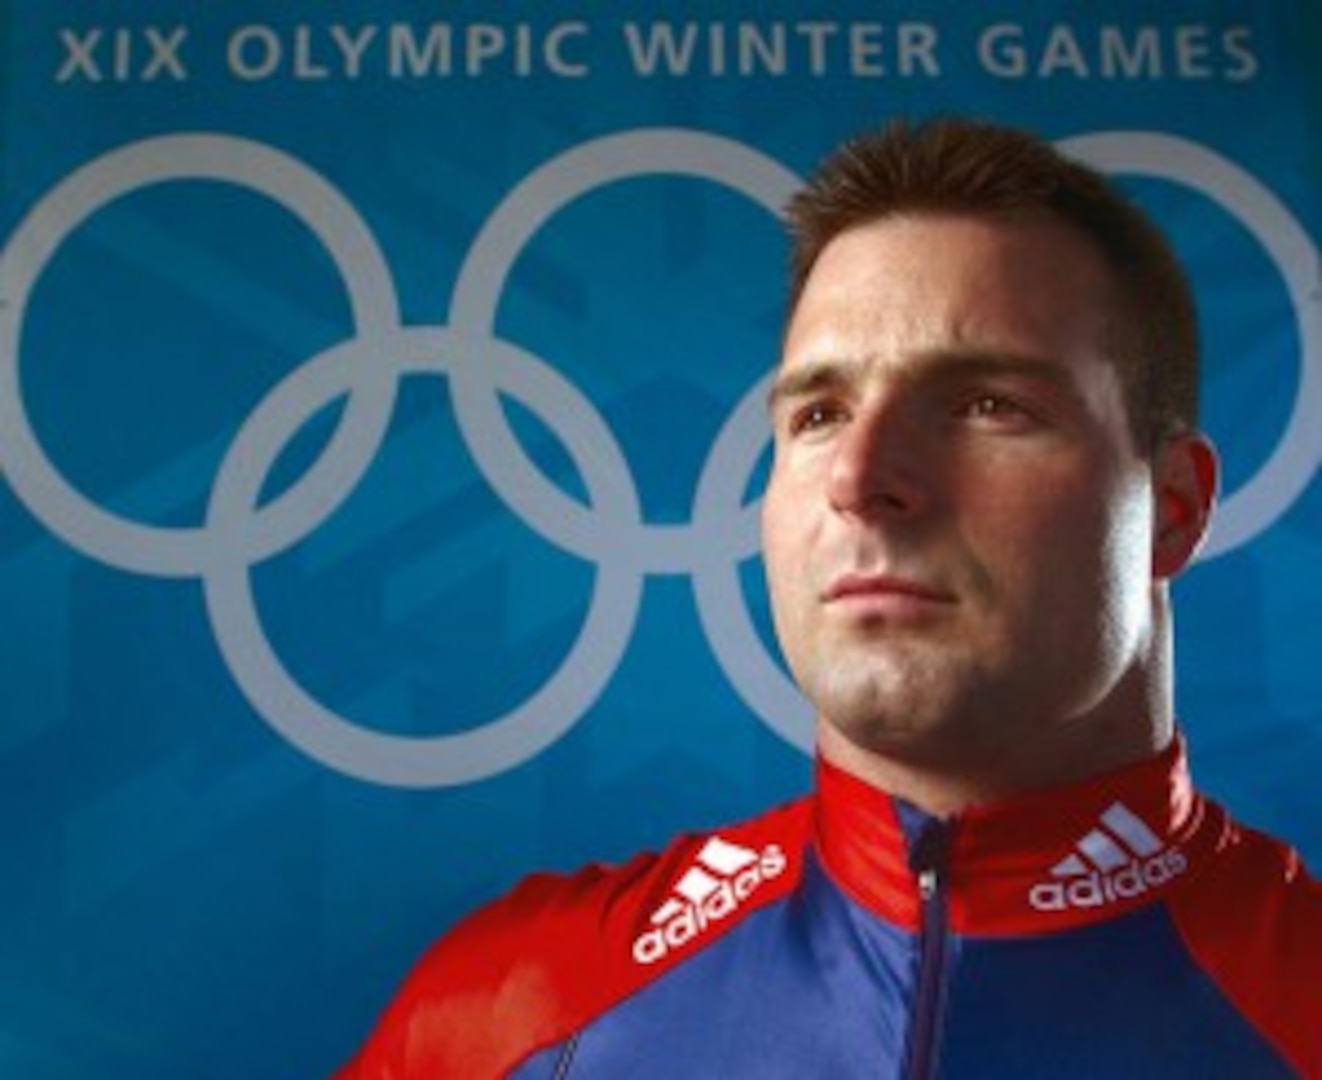 Virginia Guard Soldier to serve as bobsled coach in 2014 Olympics